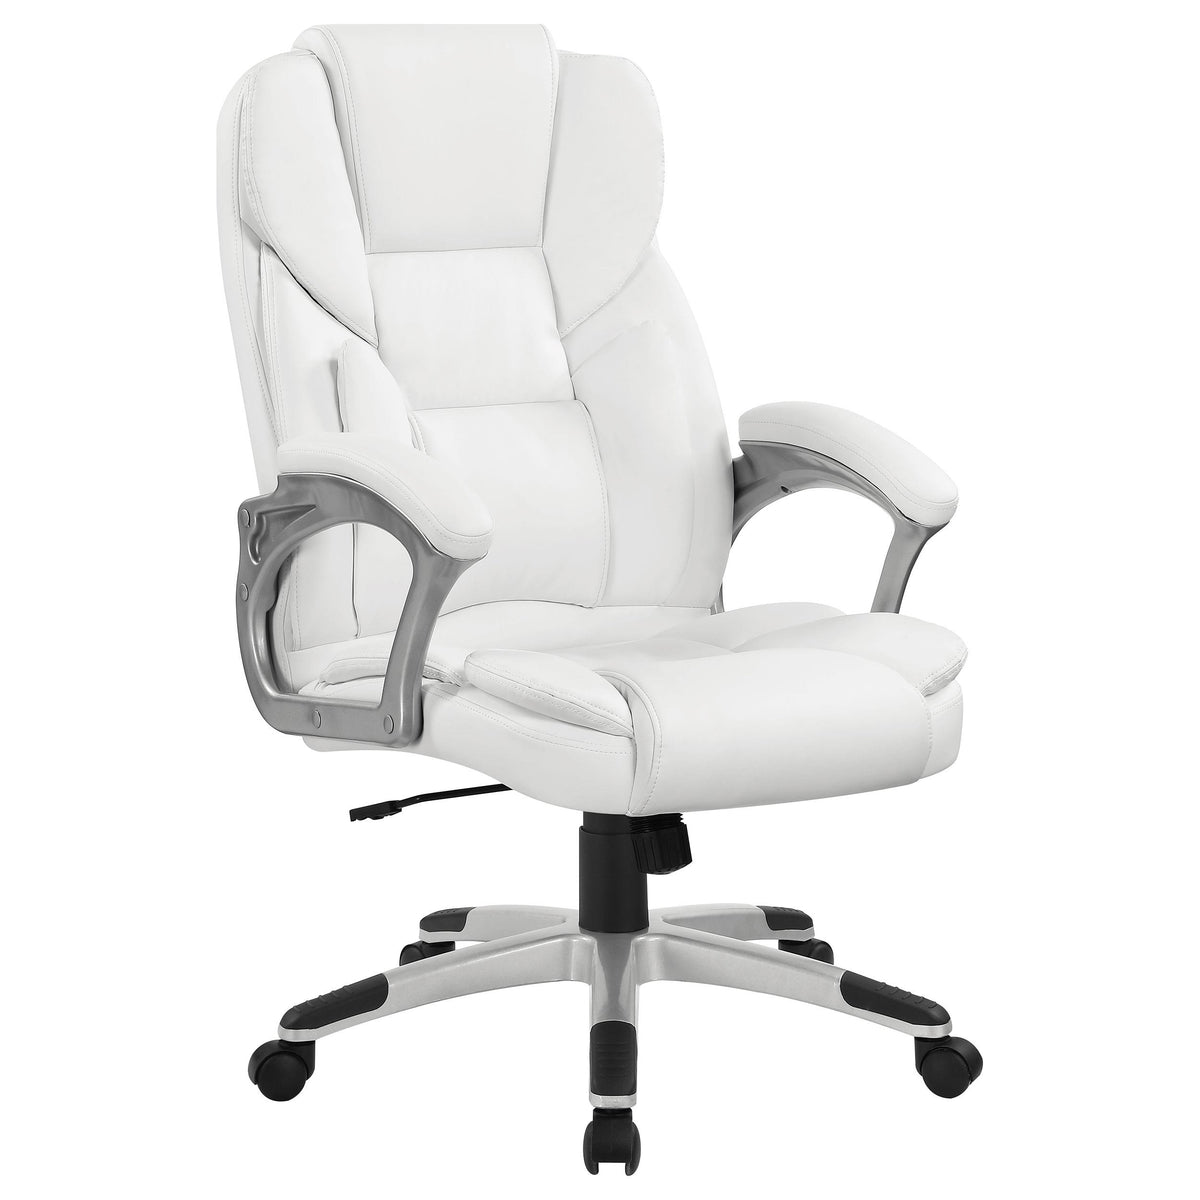 Kaffir Adjustable Height Office Chair White and Silver  Las Vegas Furniture Stores